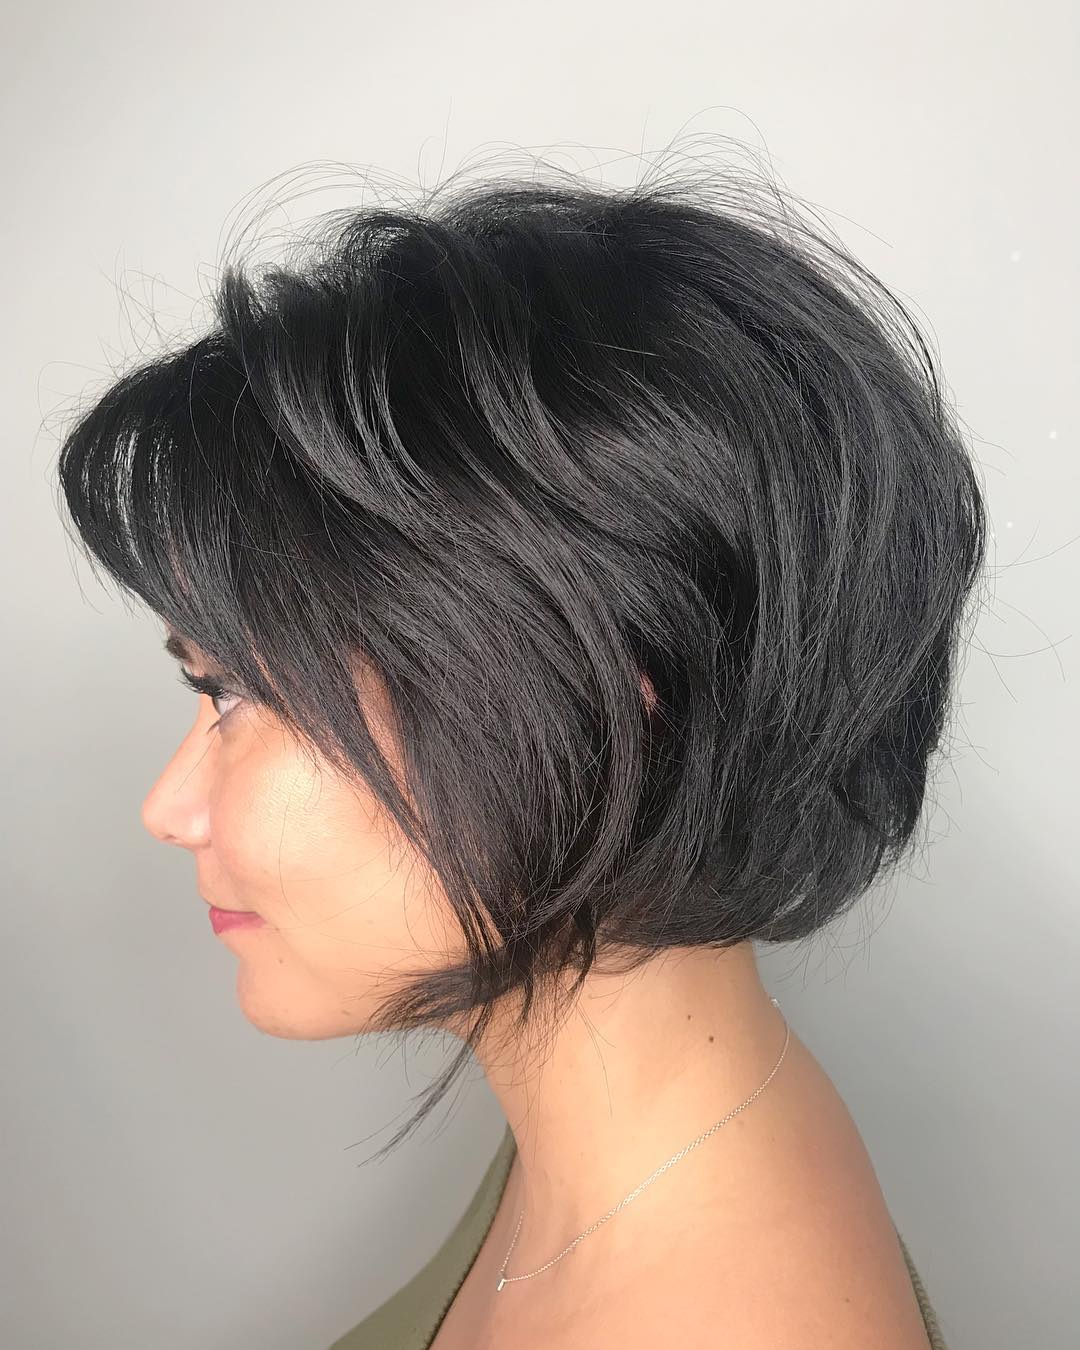 46 Mind-Blowing Short Hairstyles for Fine Hair in 2019